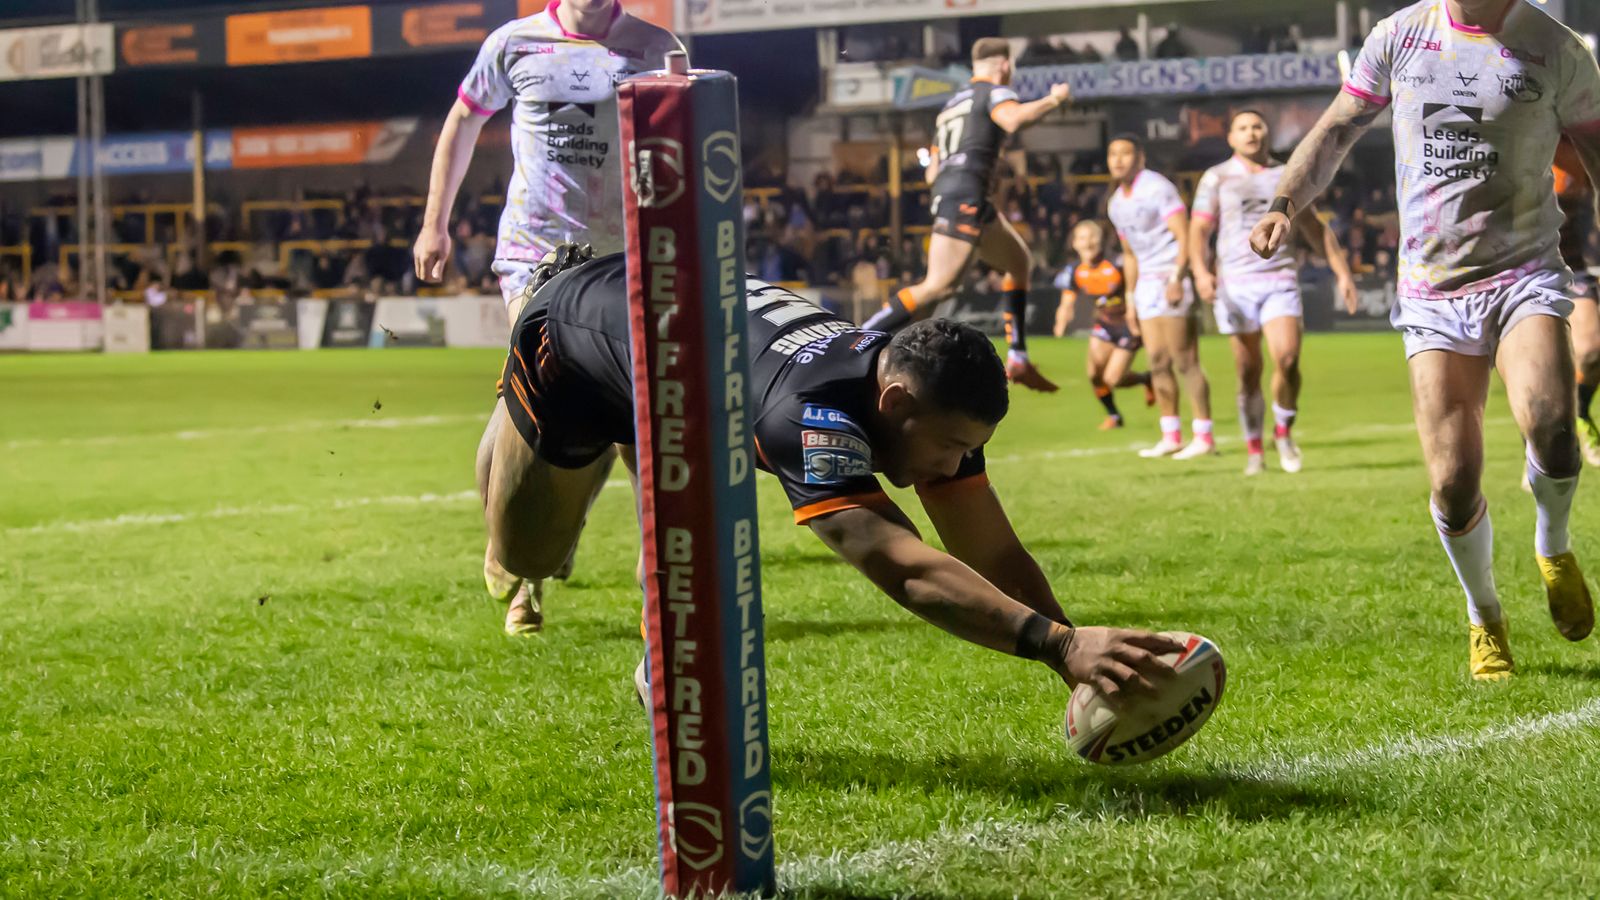 Tremendous League: Castleford Tigers beat Leeds Rhinos 14-8 to take their first win of the season